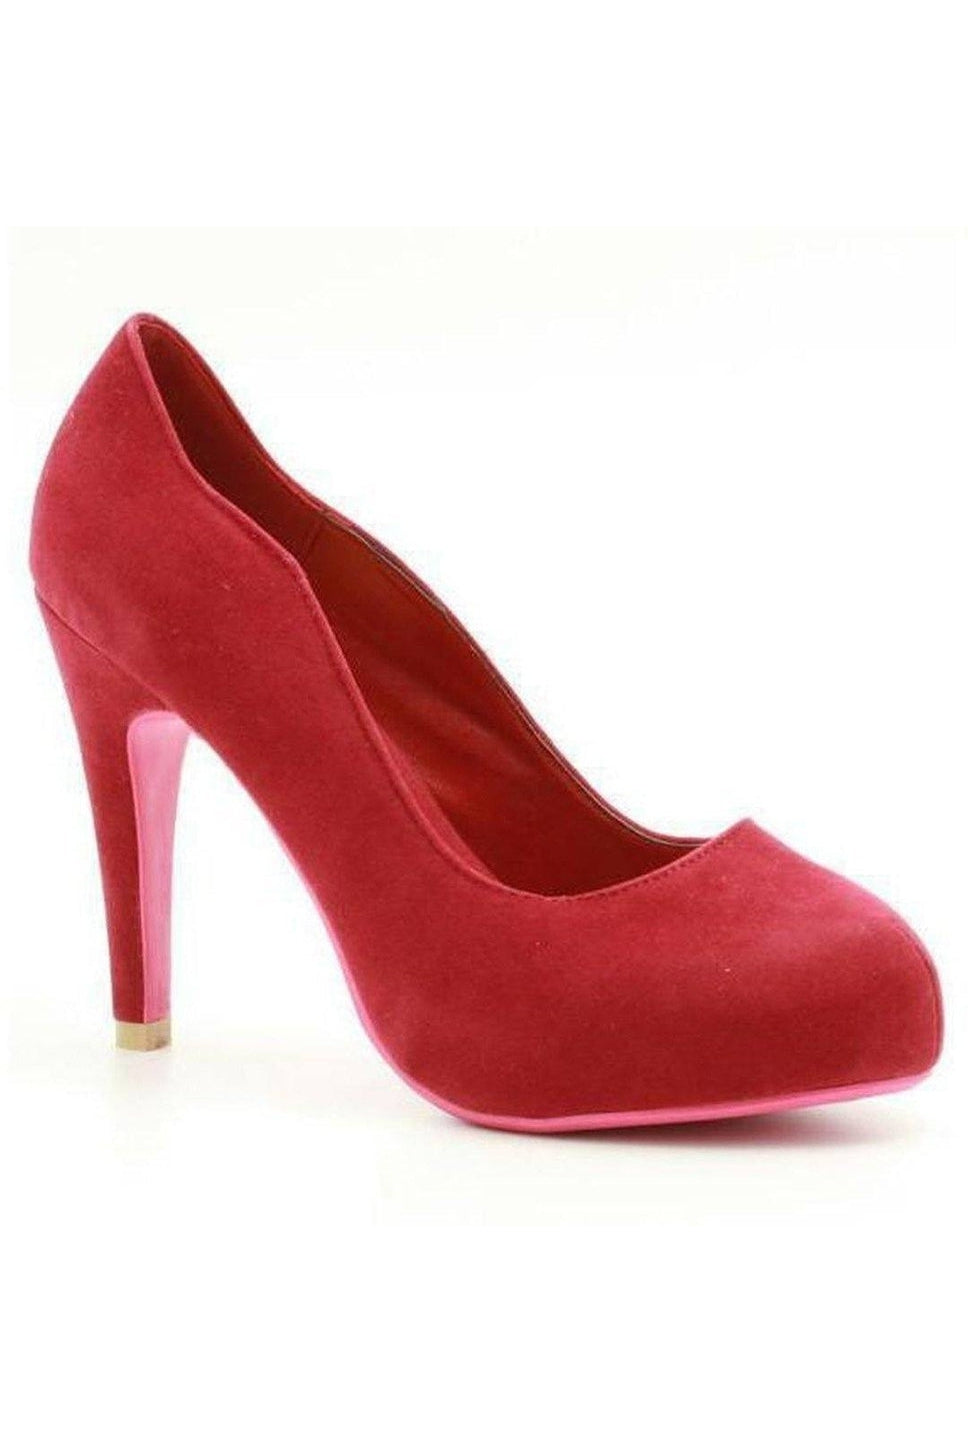 Suede Baby Doll-Red-Sexyshoes Brand-Red-Pumps-SEXYSHOES.COM